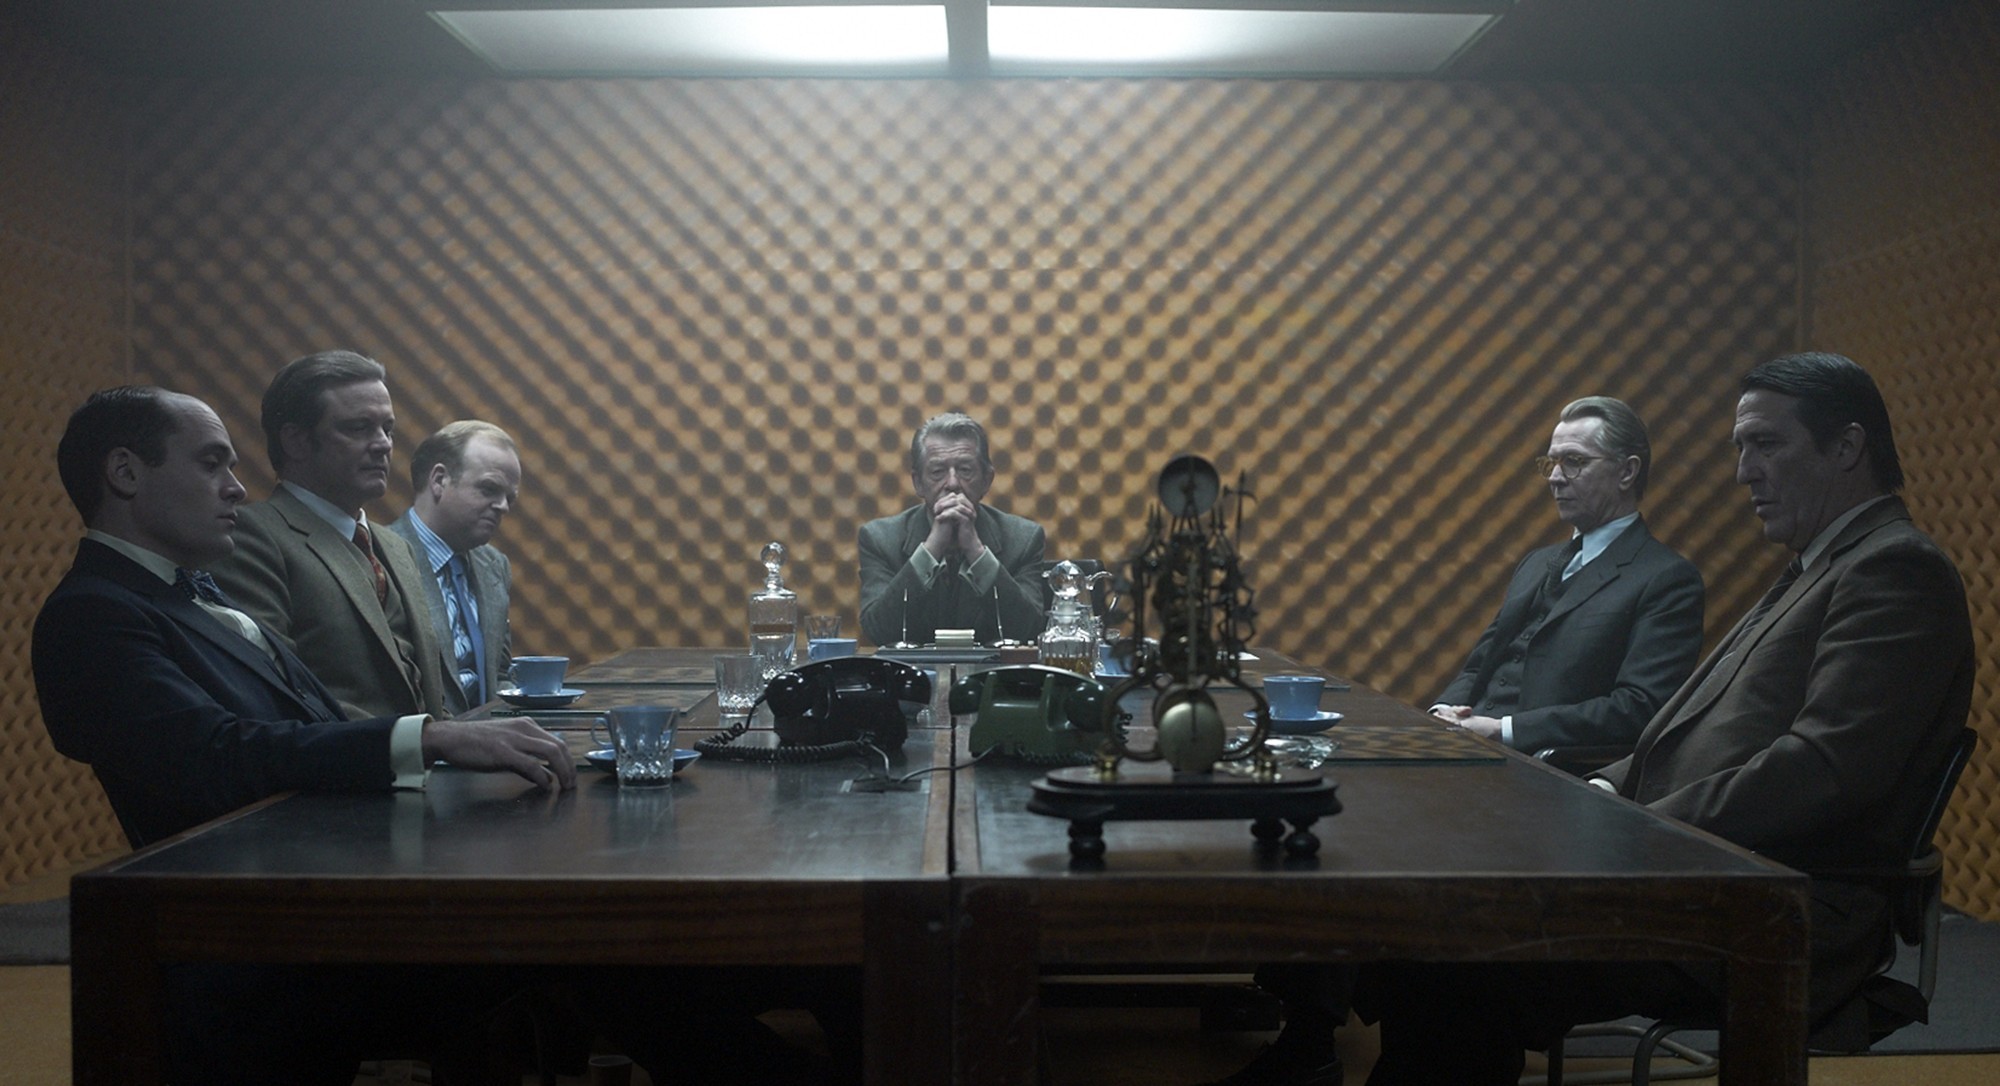 David Dencik, Colin Firth, Toby Jones, John Hurt, Gary Oldman and Ciaran Hinds in Focus Features' Tinker, Tailor, Soldier, Spy (2011)